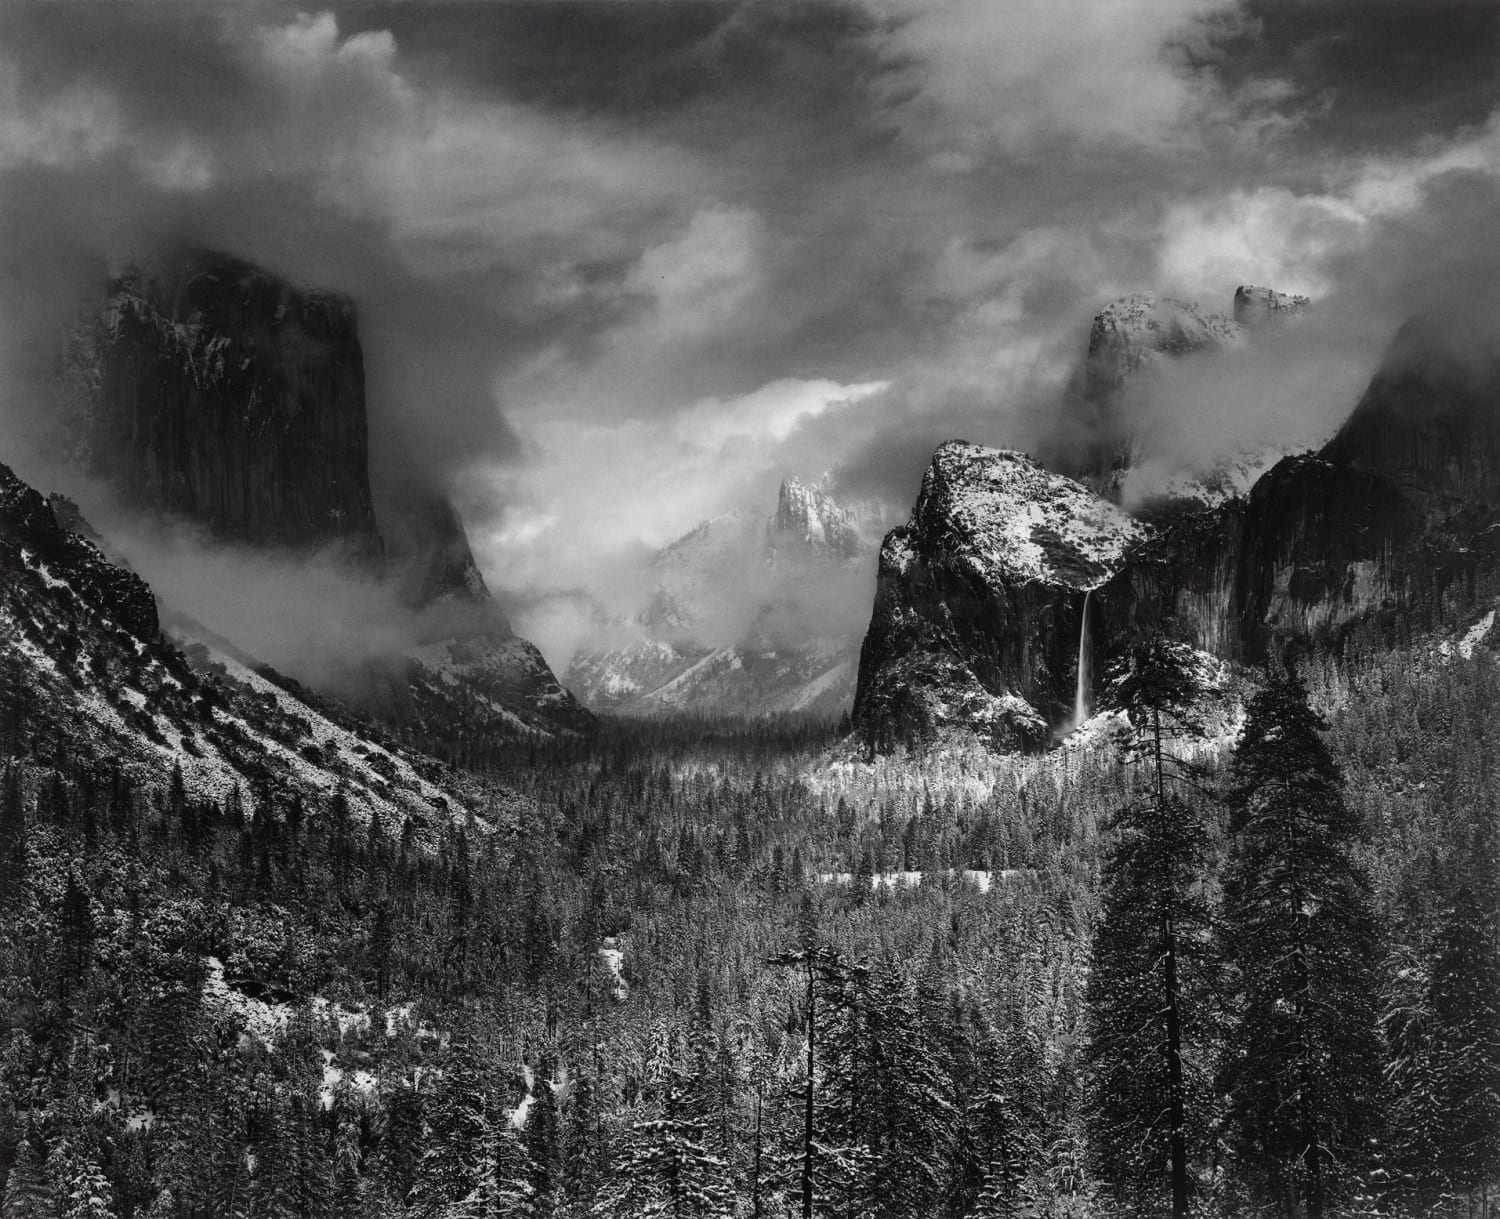 “Not seeing everything at once entices the imagination; an undefined horizon invites us to possibilities of the views beyond.” On Yosemite National Park's 130th anniversary, rock climber @conrad_anker reflects on photos in our collection: https://t.co/ZQ4Xc87nAg 📸 Ansel Adams